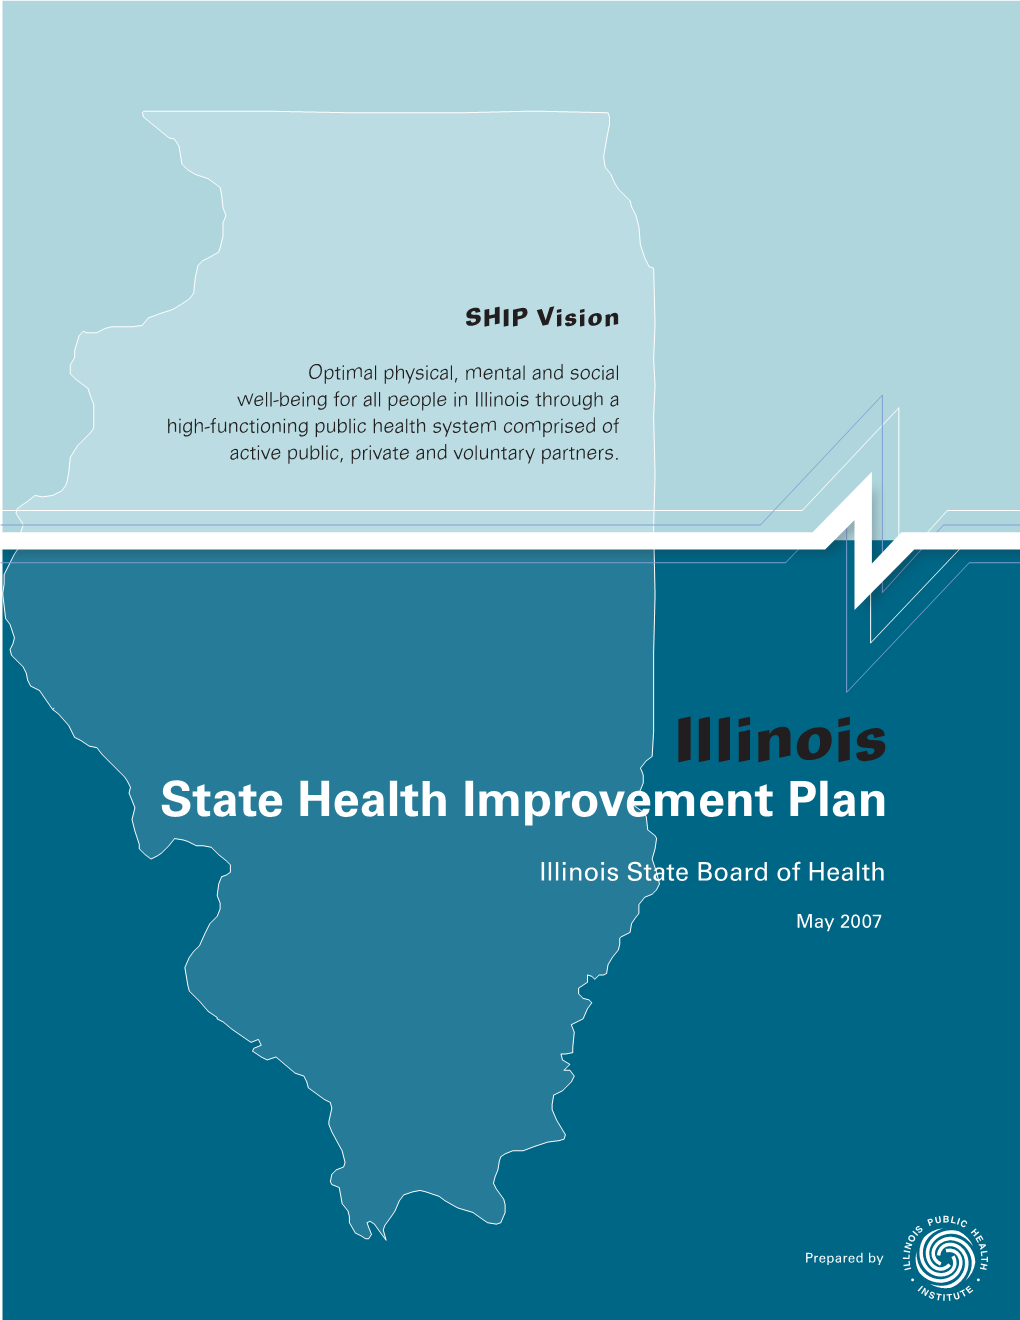 Illinois Through a High-Functioning Public Health System Comprised of Active Public, Private and Voluntary Partners